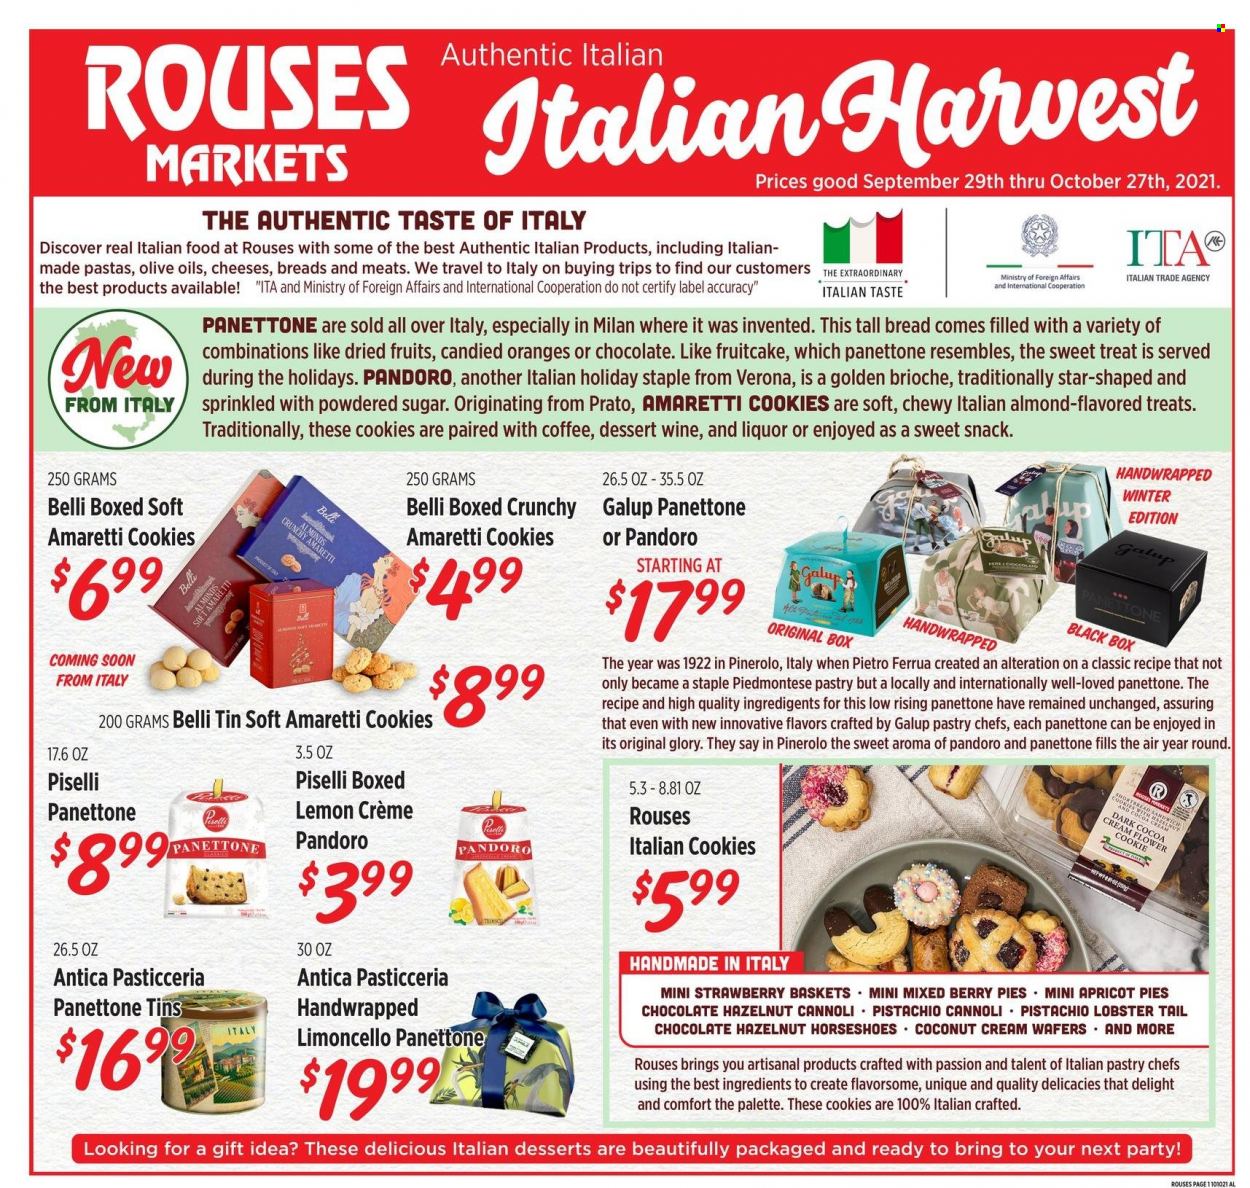 thumbnail - Rouses Markets Flyer - 09/29/2021 - 10/27/2021 - Sales products - brioche, panettone, oranges, coconut, lobster, lobster tail, cheese, Amaretti, cookies, wafers, chocolate, snack, cocoa, sugar, icing sugar, dessert wine, wine, Limoncello, liquor, Palette. Page 1.